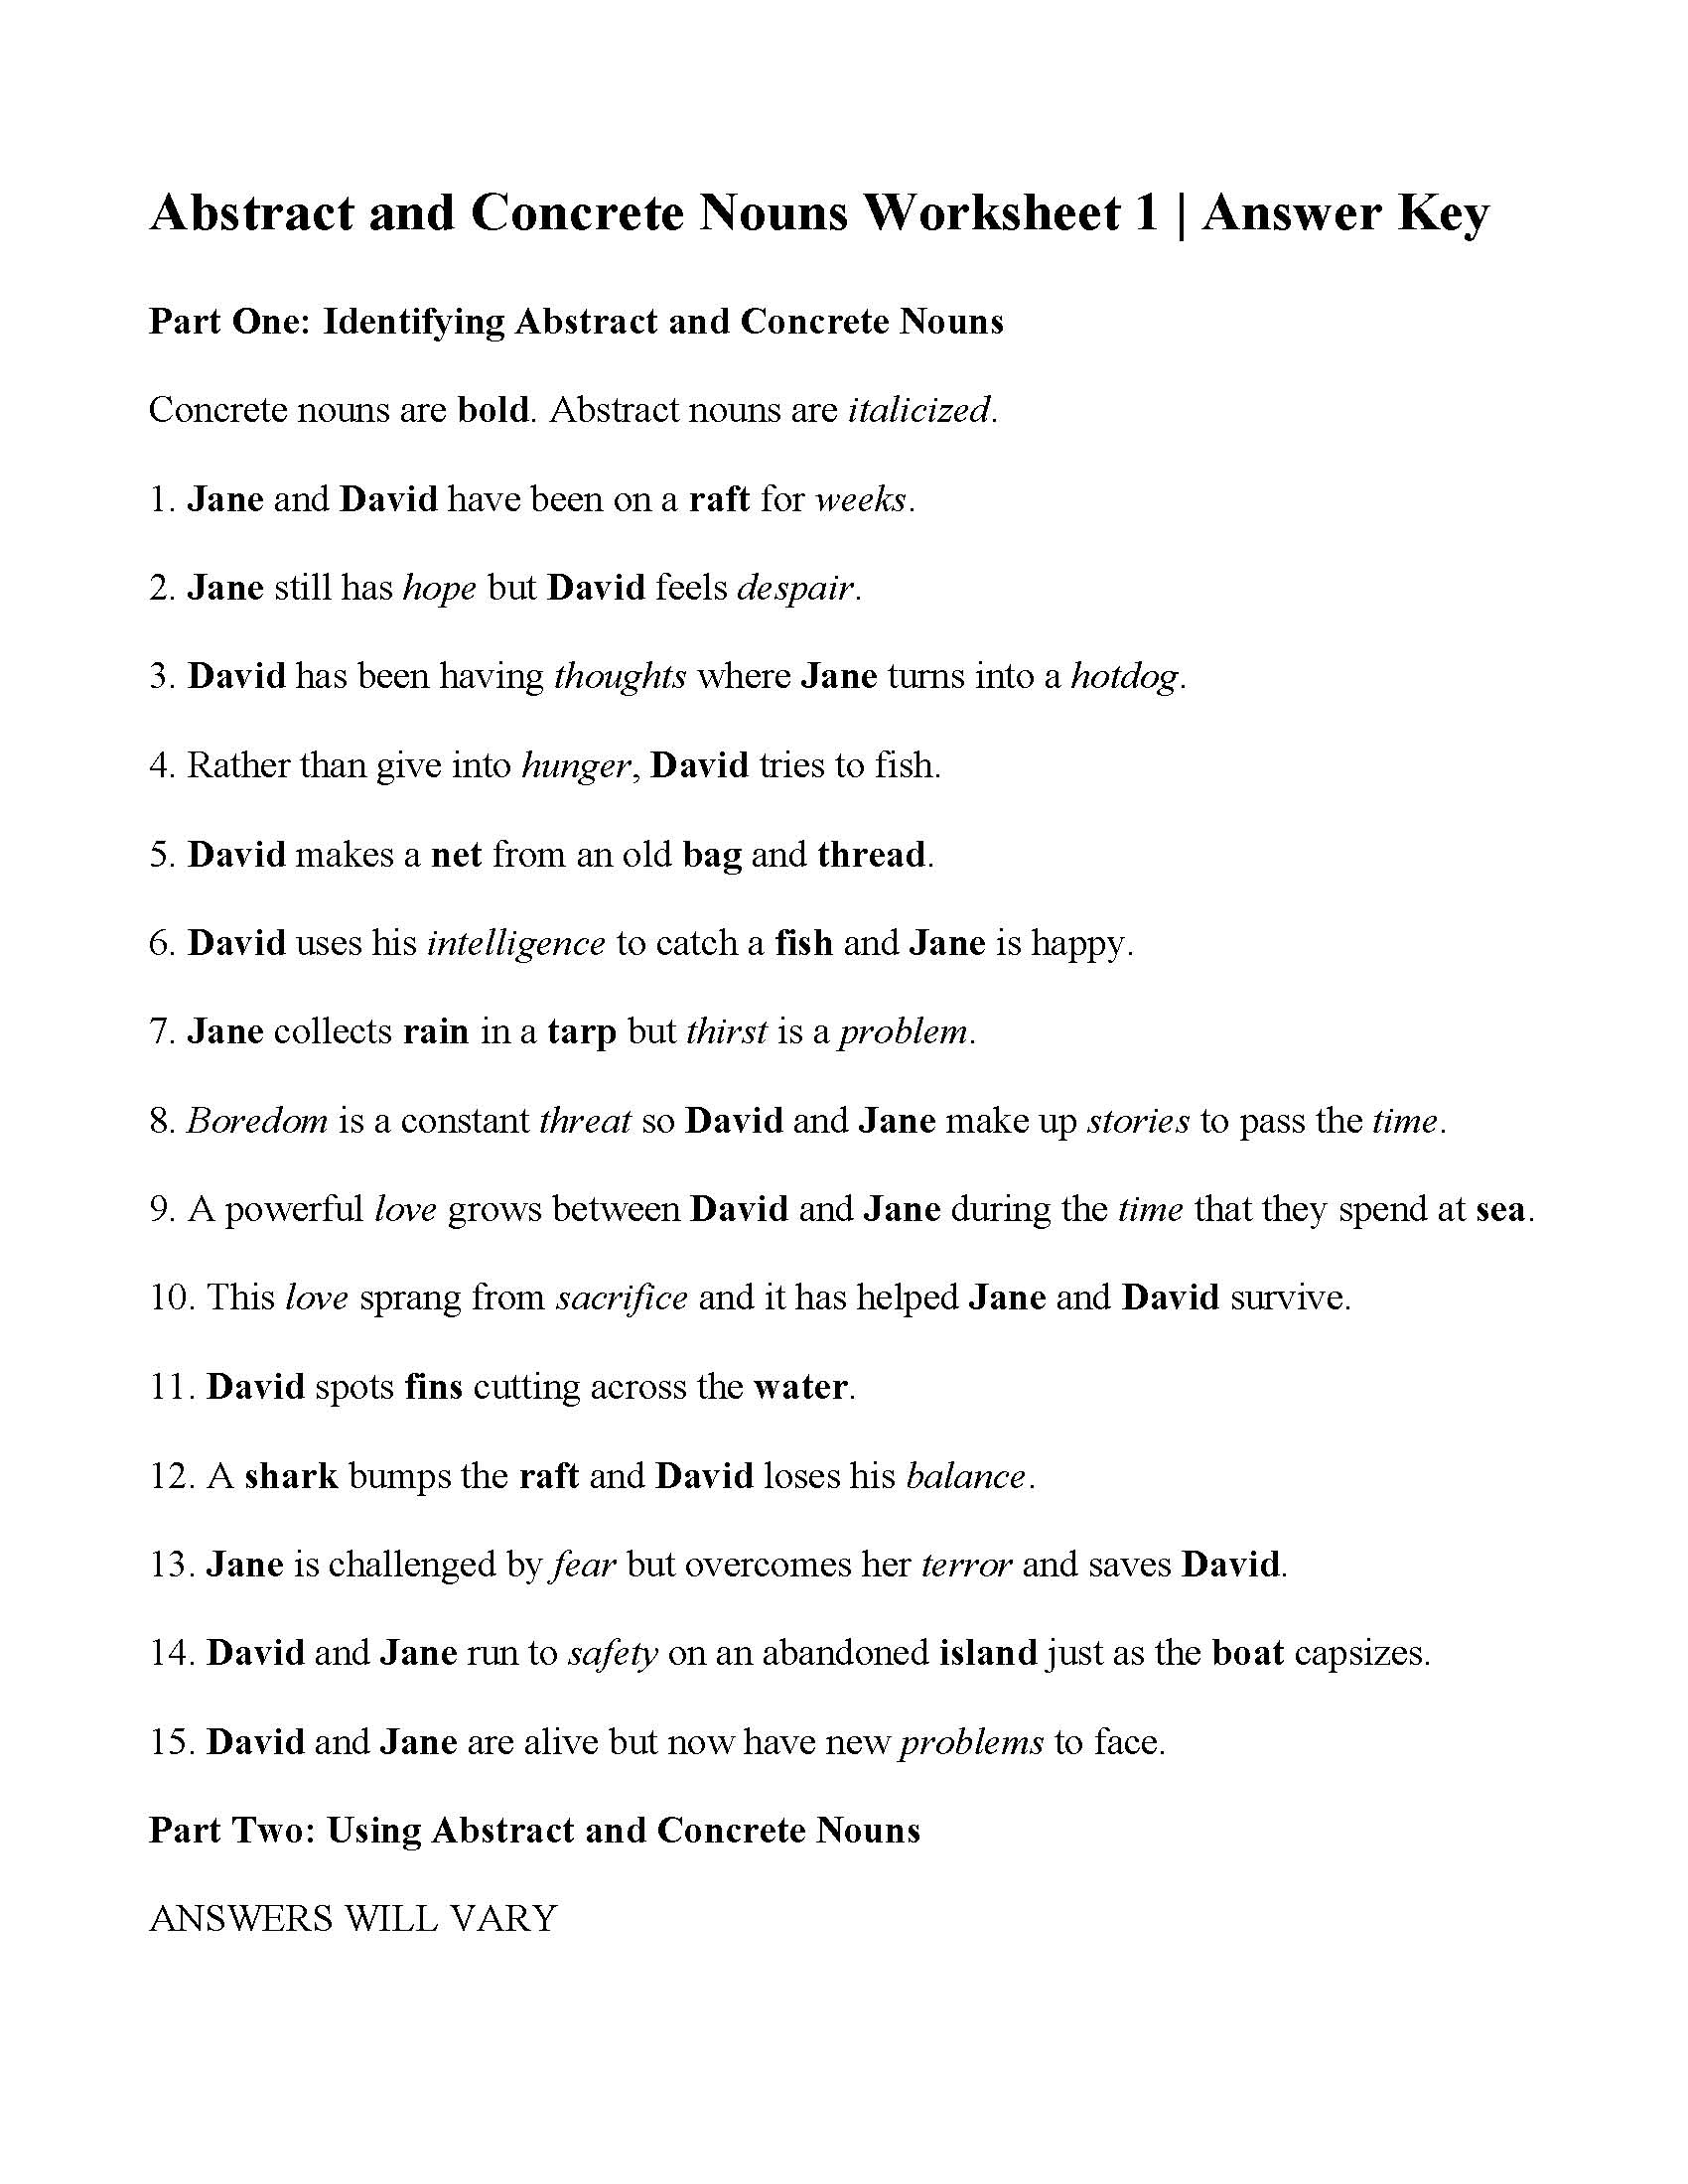 This is a preview image of Concrete and Abstract Nouns Worksheets | "Lost at Sea...". Click on it to enlarge it or view the source file.